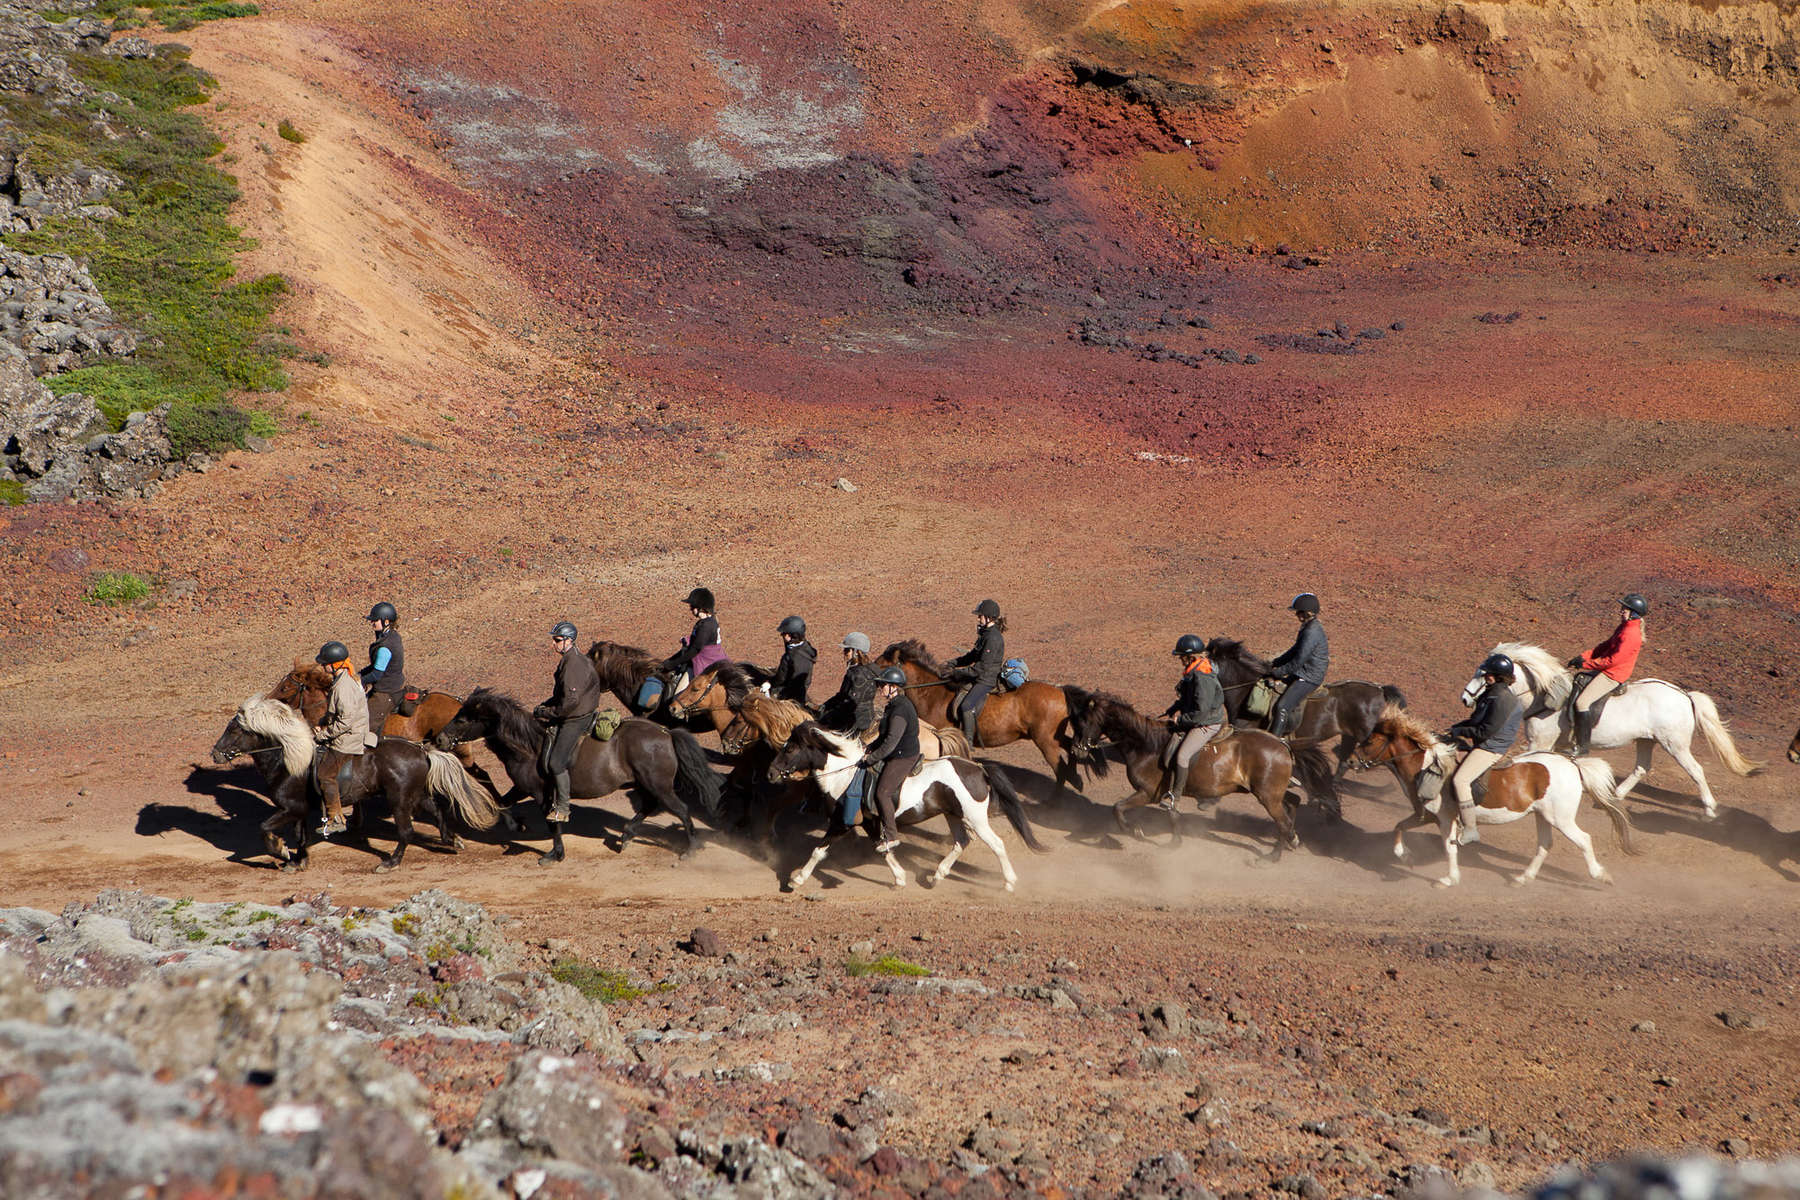 Riders tolting with a group of loose horses